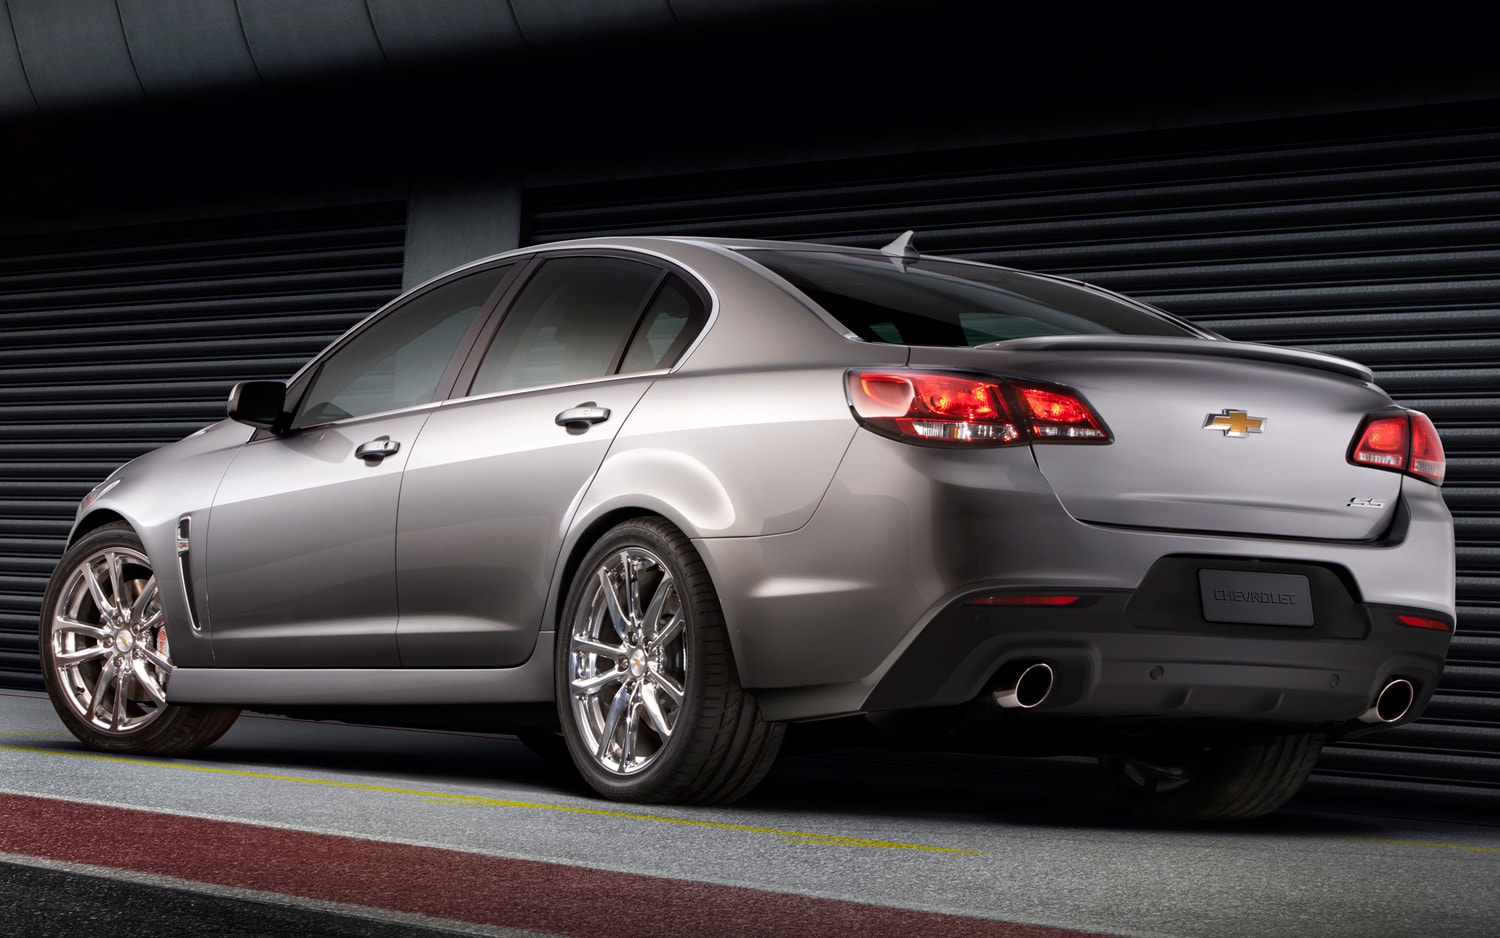 We Hear: Canada Doesn't Get 2014 Chevrolet SS